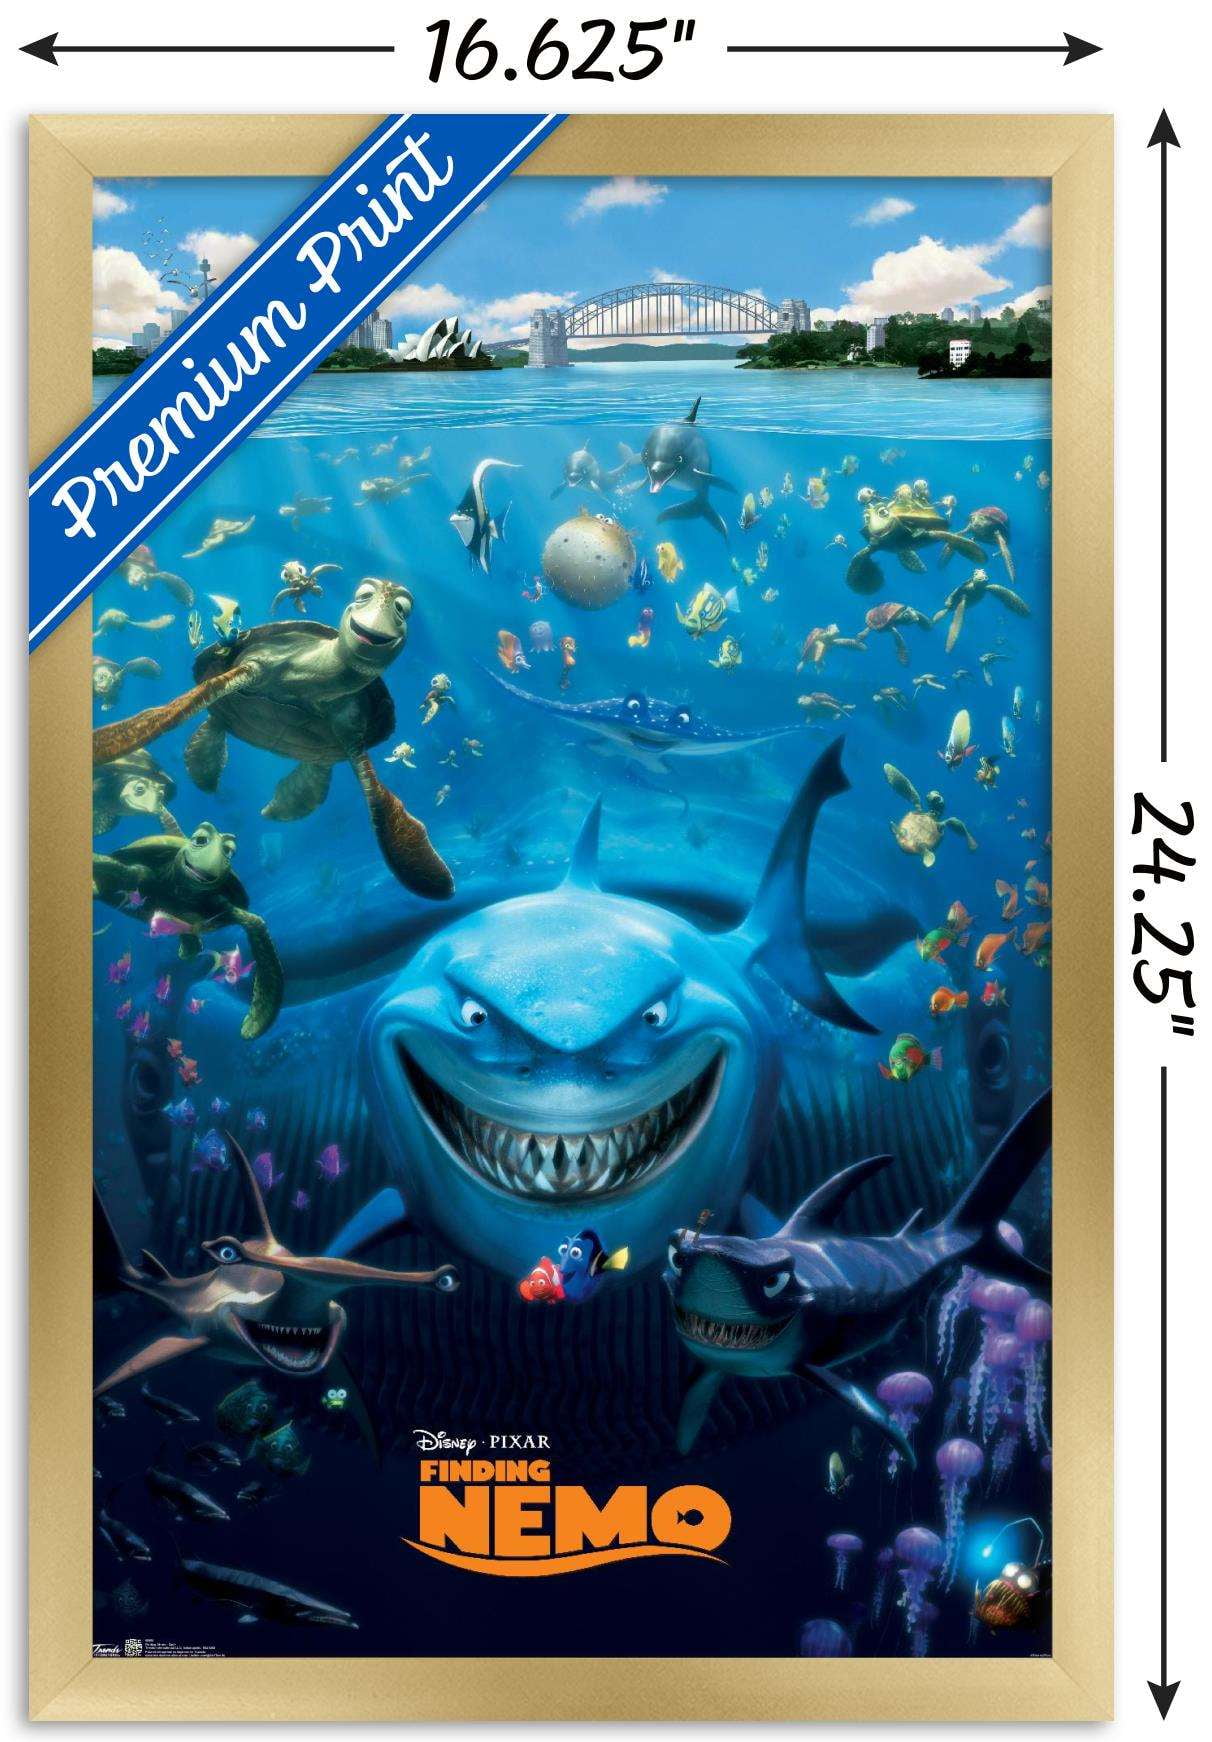 FRAMED Finding Nemo Movie Poster16 Different Kids Posters to choose from! 